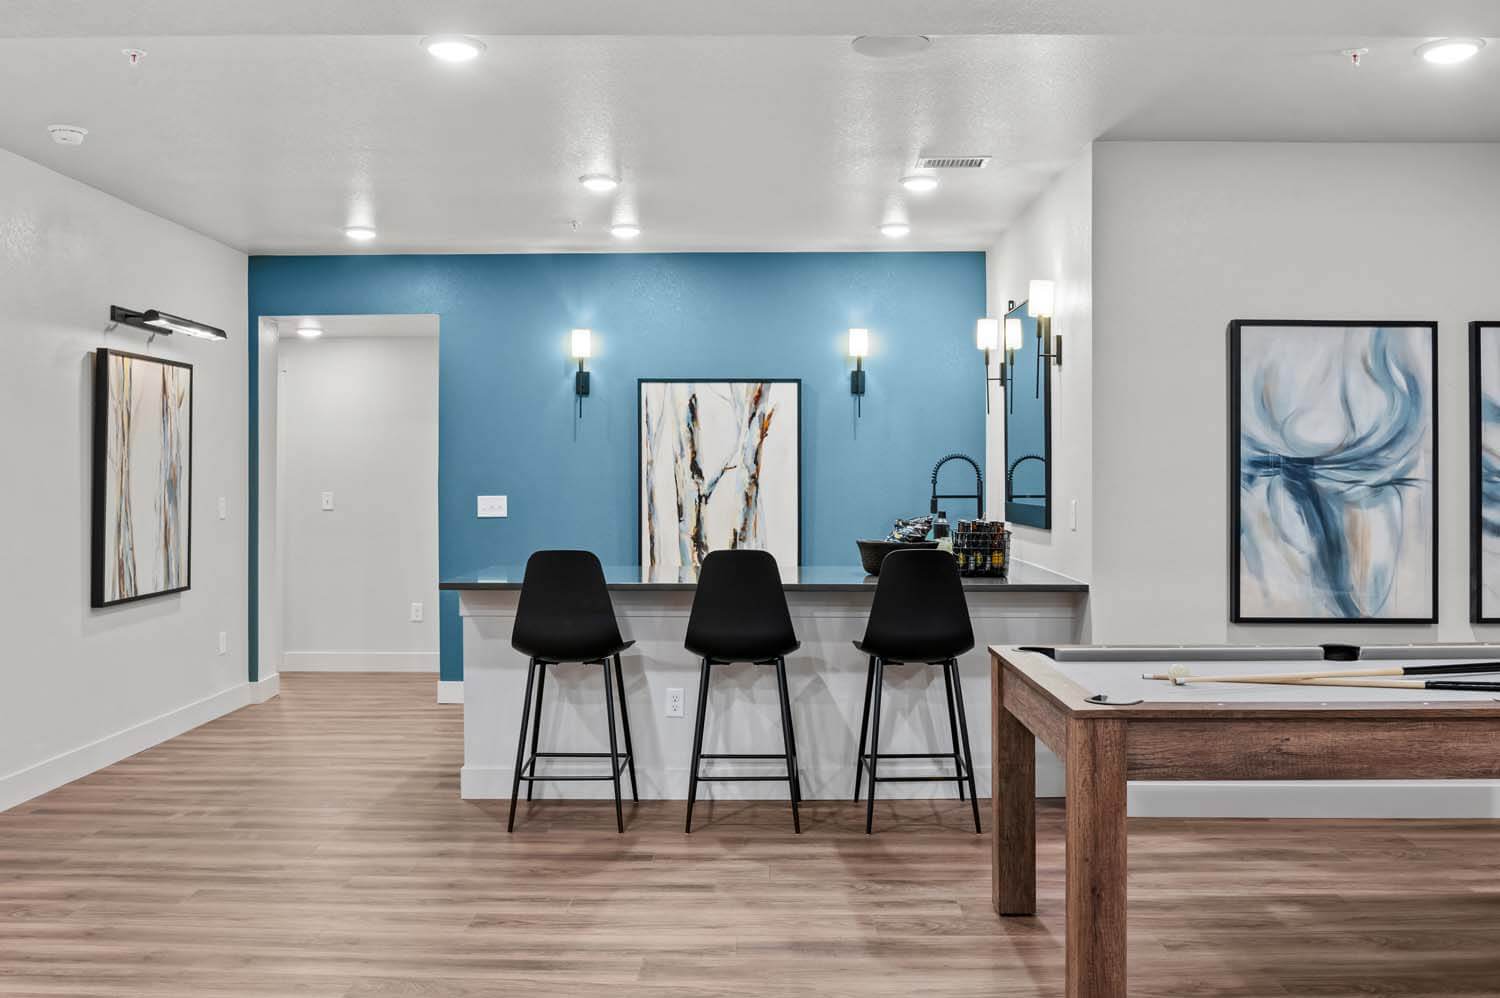 The wet bar area in the developed basement has a blue accent wall, hardwood floors, dark quartz countertops with a sink, beige cabinets and an island that easily fits three stools. There is an open space next to it that is ideal for a pool table.